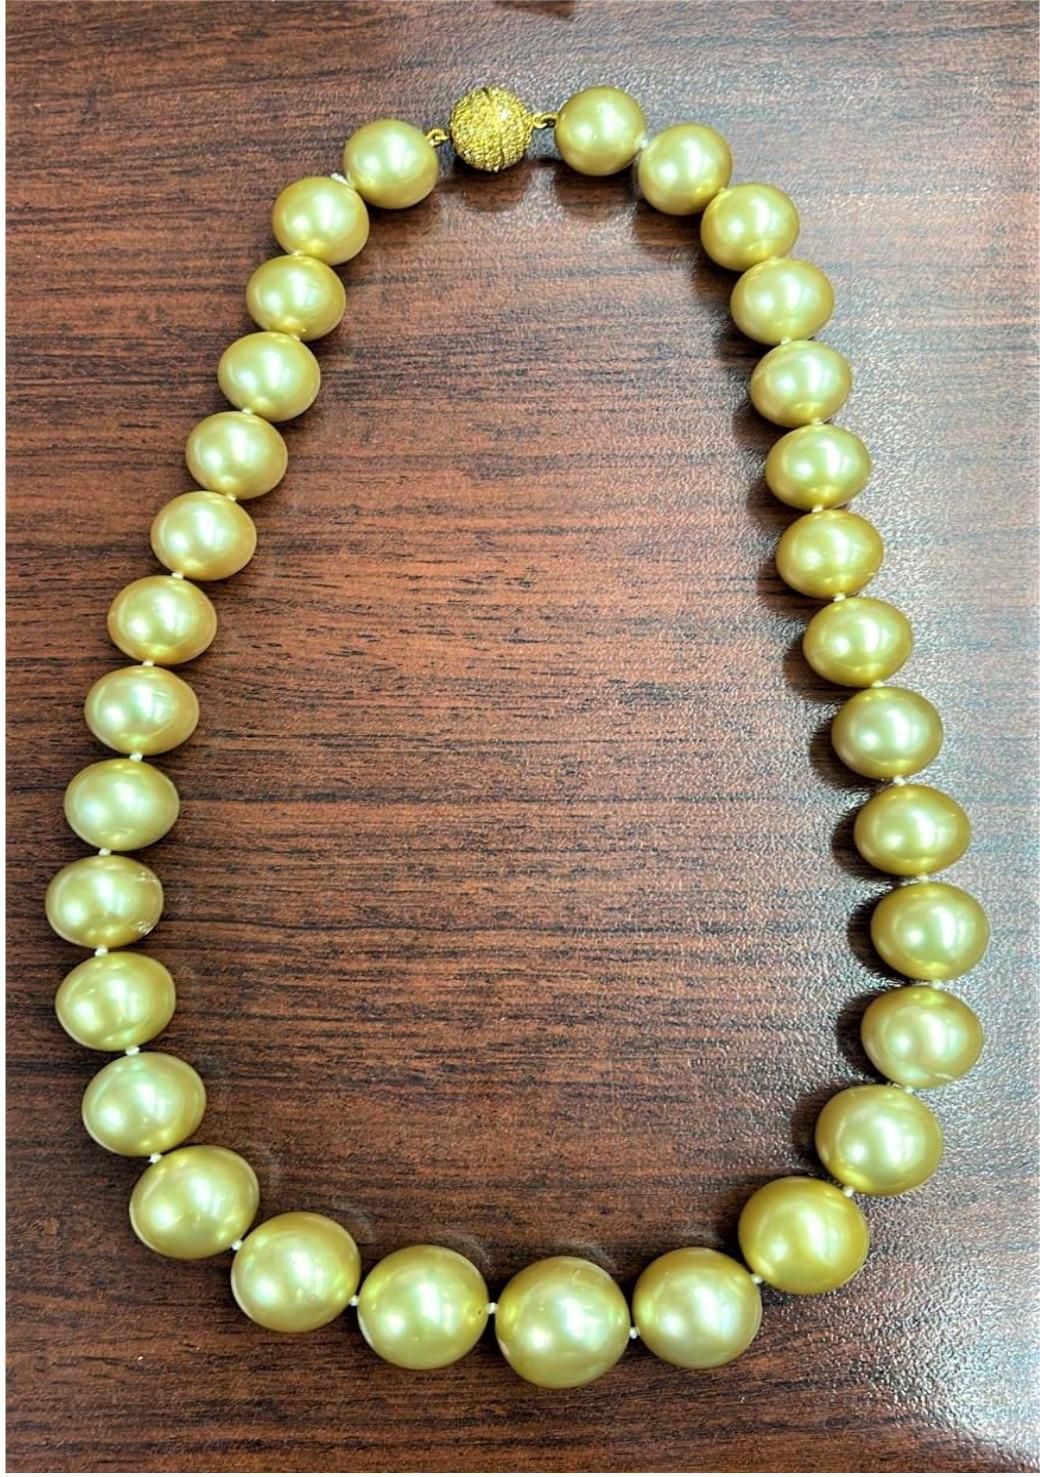 The Following Item we are offering is this Beautiful Important 18KT Gold Magnficent Rare Golden South Sea Pearl and Fancy Diamond Necklace. Bracelet is comprised of 31 Beautiful Magnificent High Luster Large South Sea Golden Pearls that gives off a